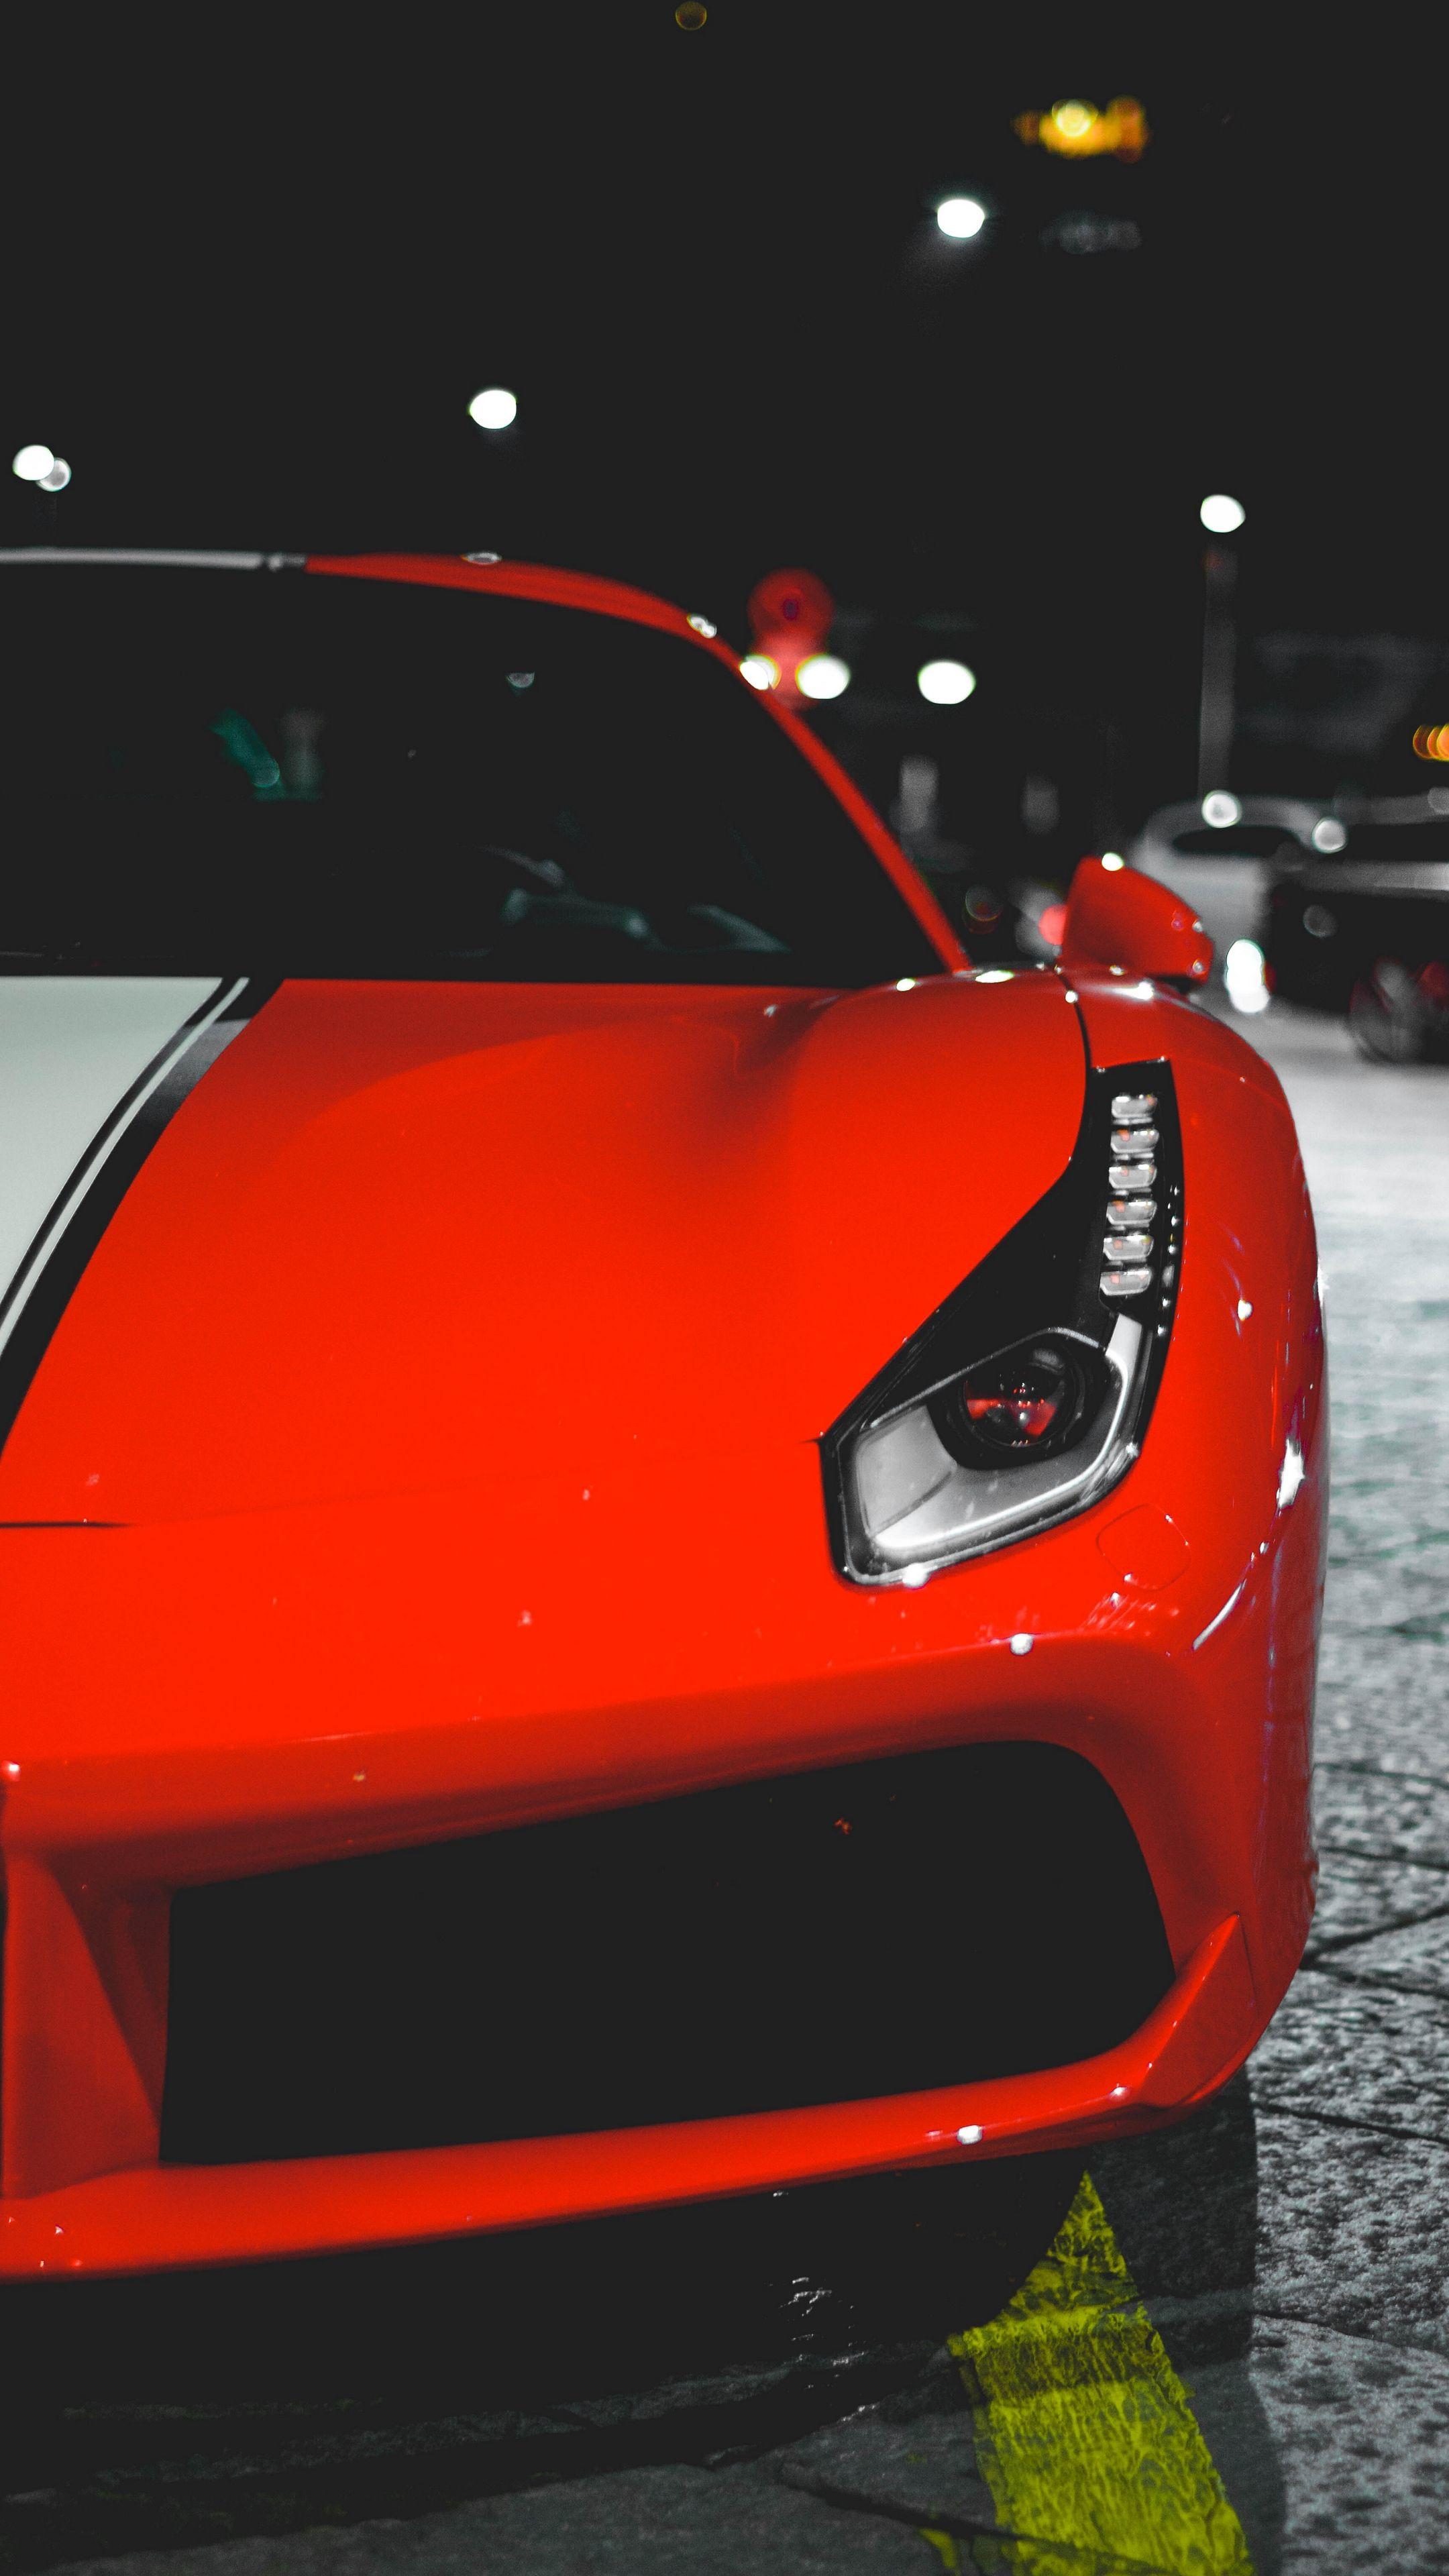 Cars #auto #frontview #red #wallpaper HD 4k background for android :). Sports car wallpaper, Car wallpaper, Car iphone wallpaper